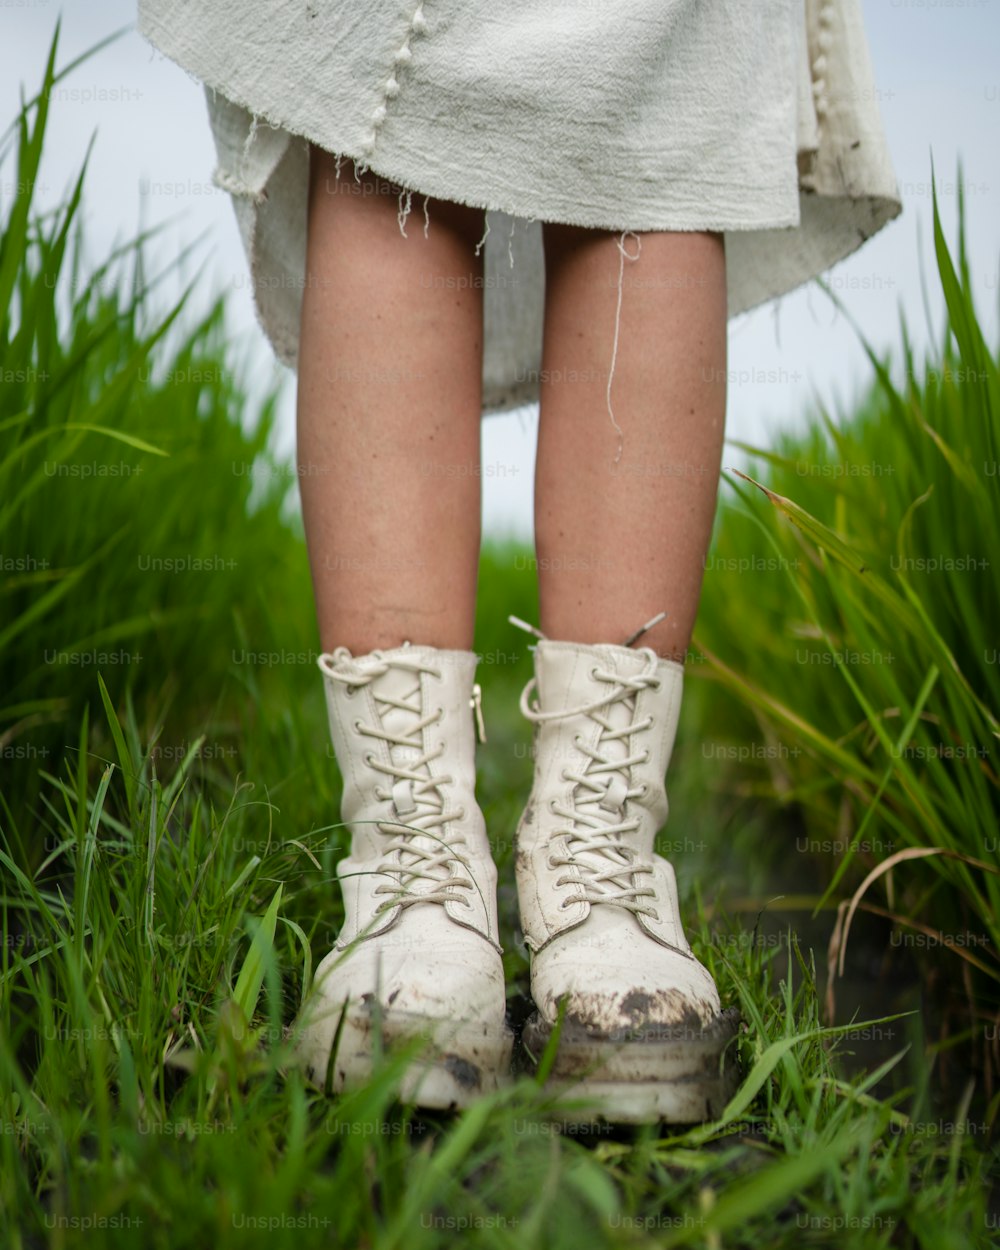 a close up of a person wearing white boots